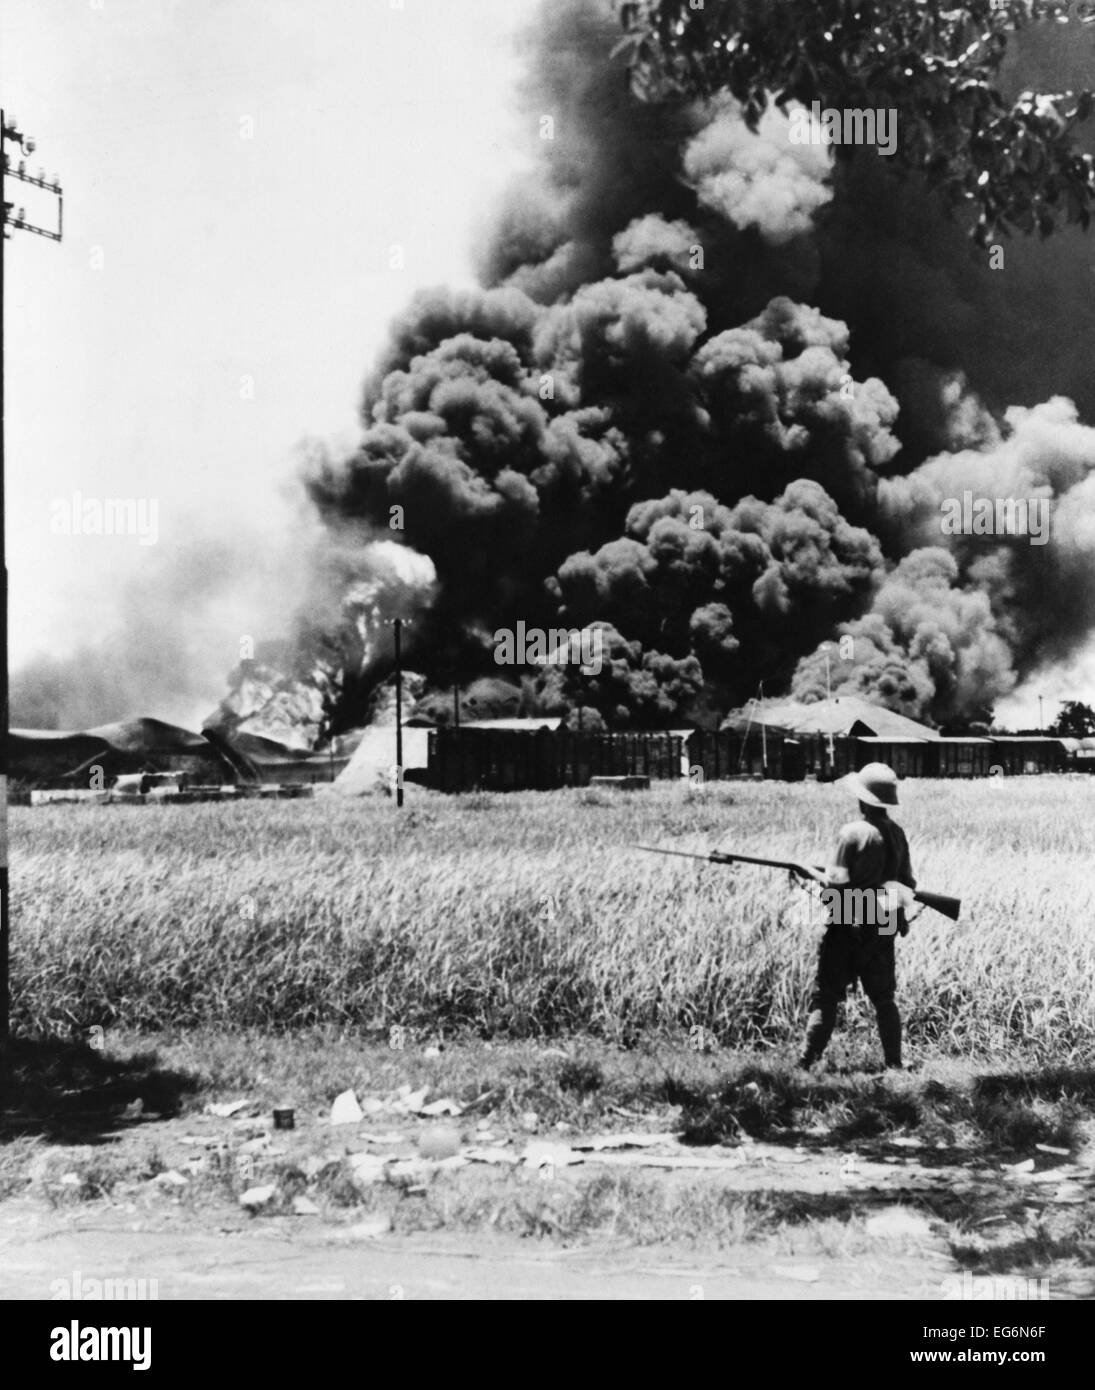 Burning oil tanks and cars left by retreating Dutch in Tandjong, Java. Ca. Feb.-Mar. 1942. World War 2. (BSLOC 2014 10 137) Stock Photo